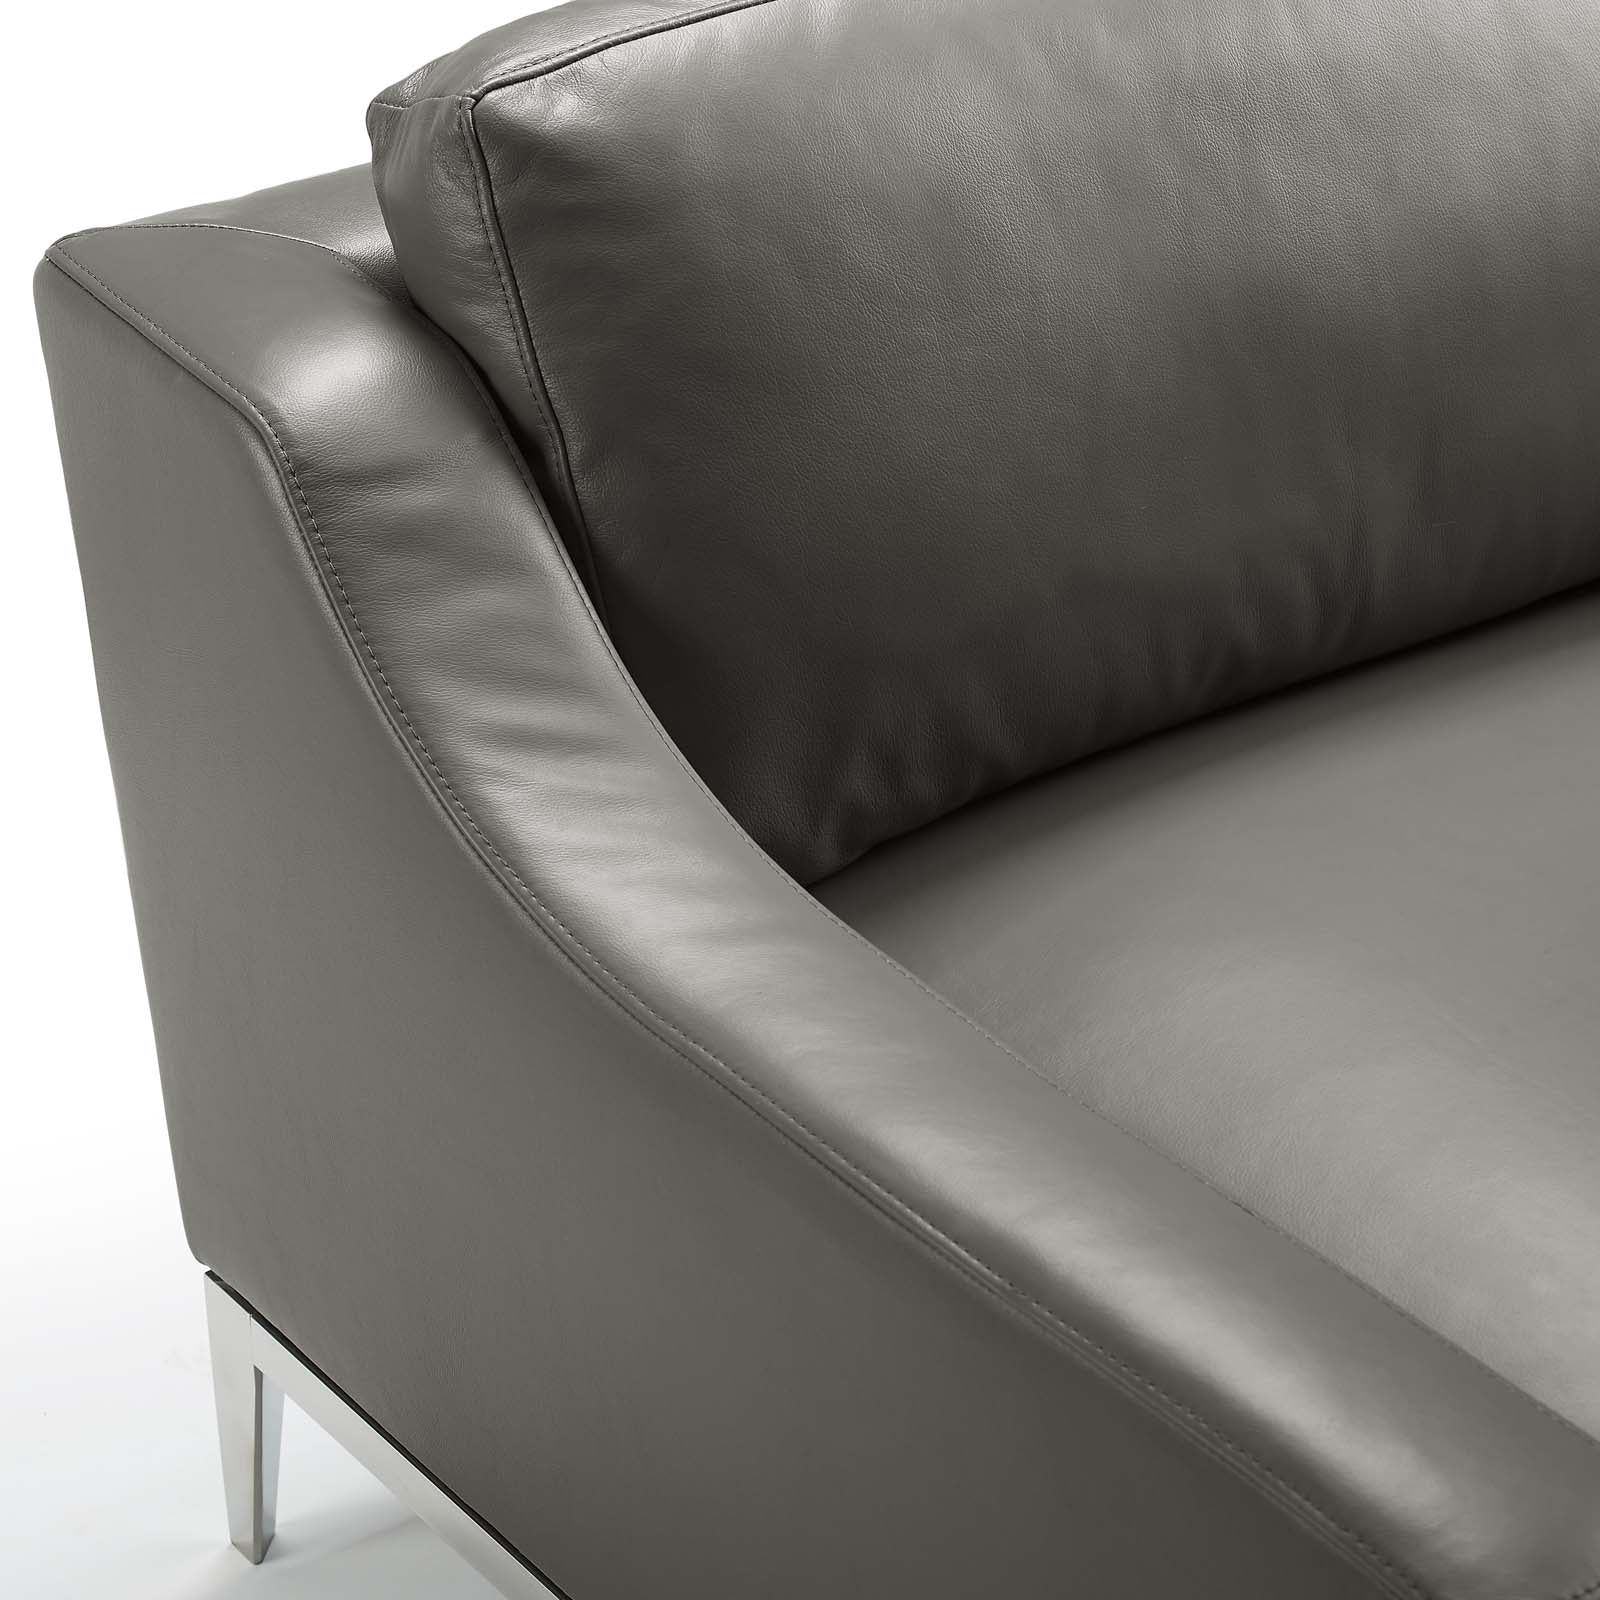 Harness Stainless Steel Base Leather Armchair - East Shore Modern Home Furnishings